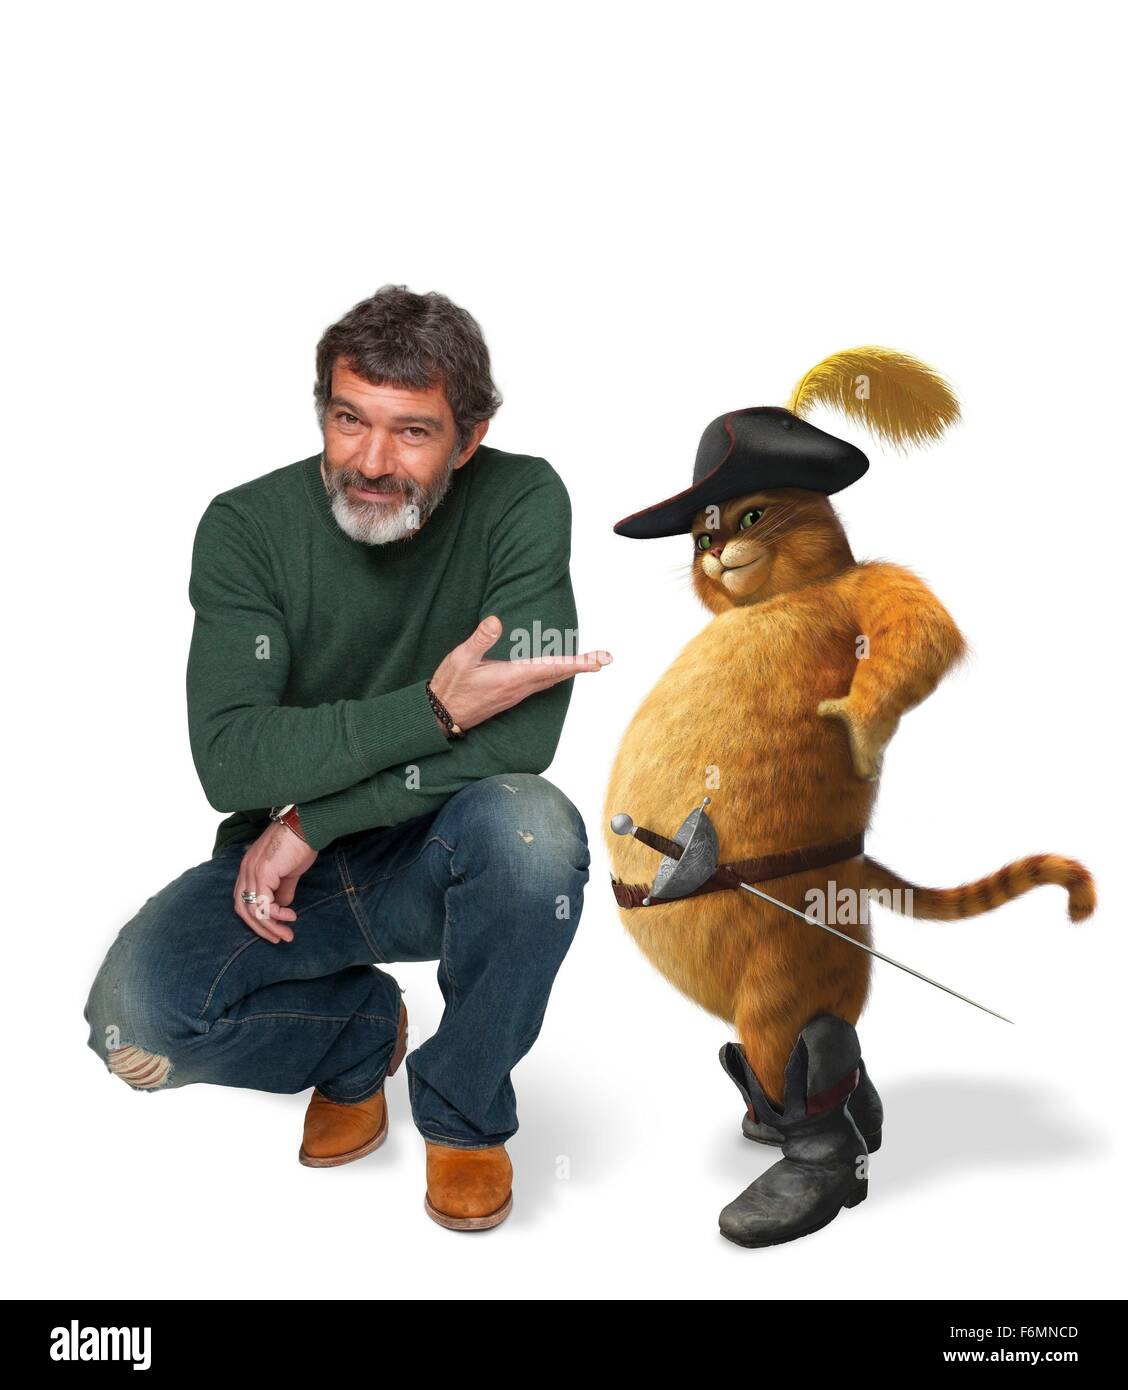 RELEASE DATE: May 21, 2010. MOVIE TITLE: Shrek Forever After. STUDIO: DreamWorks. PLOT: The further adventures of the giant green ogre, Shrek, living in the land of Far, Far Away. PICTURED: ANTONIO BANDERAS as Puss in Boots. Stock Photo